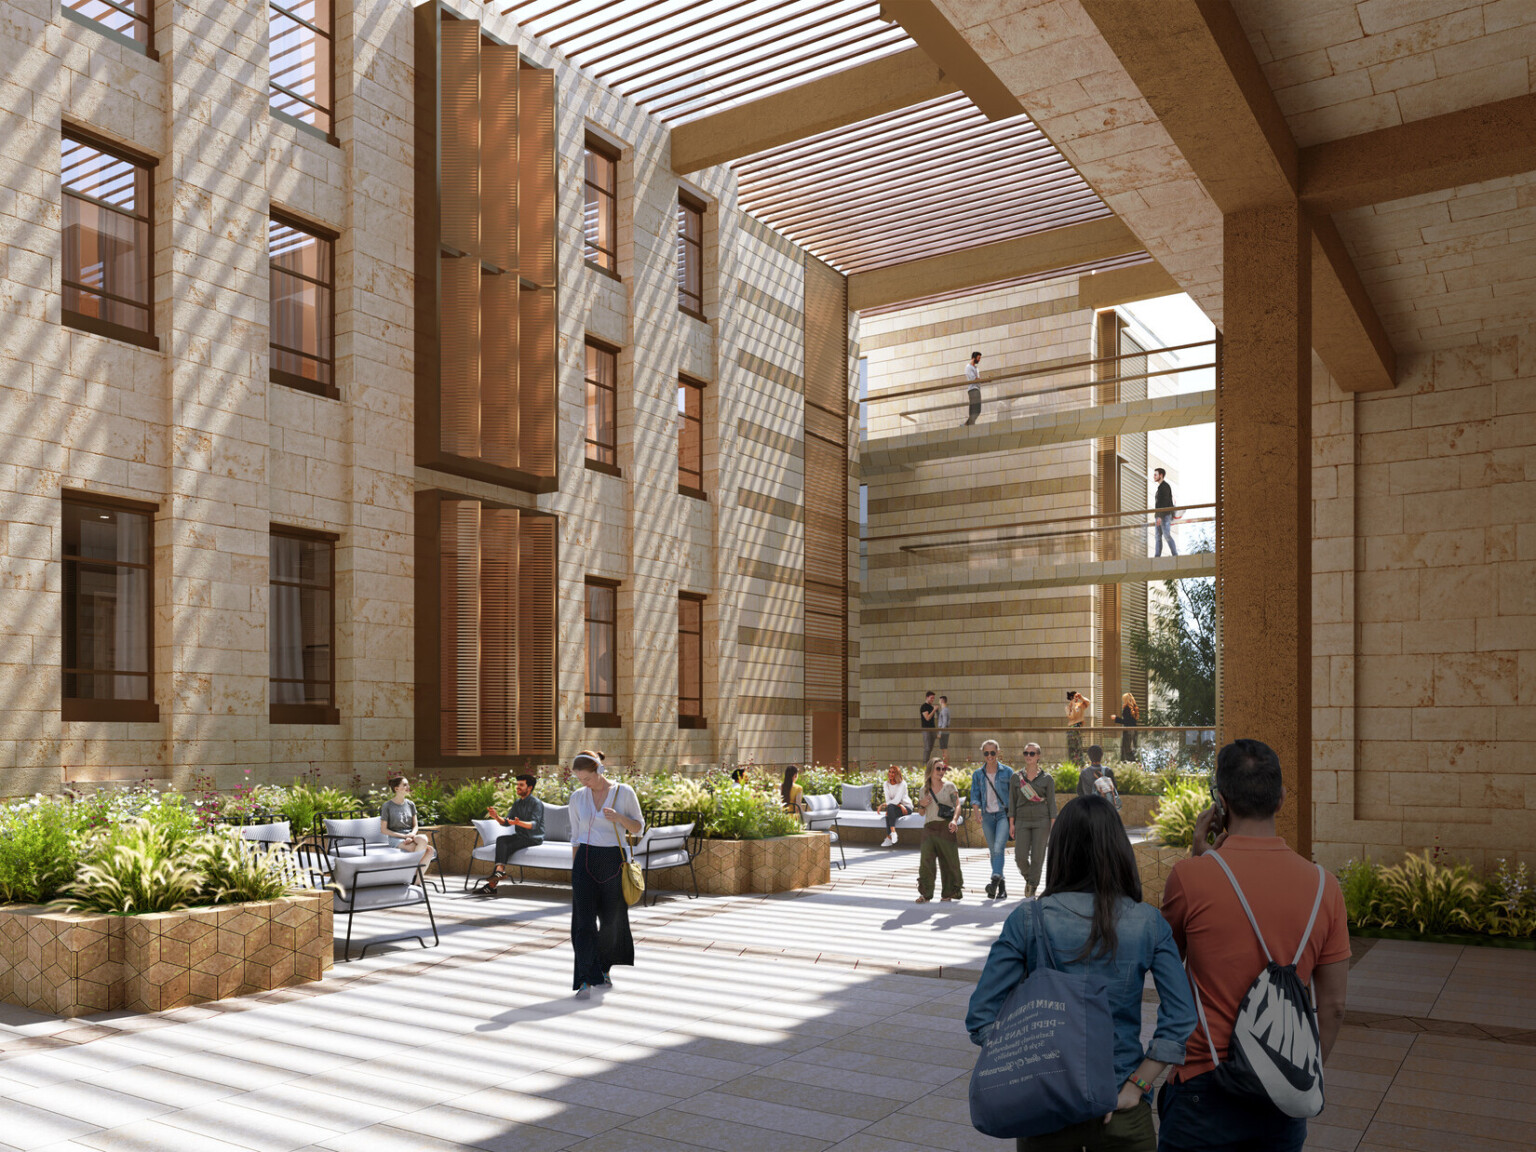 An interior courtyard of a university building. The space is open to the sky and features a mix of stone and wooden architectural elements, with sunlight streaming through slatted overhead structures, creating intricate patterns of light and shadow on the ground